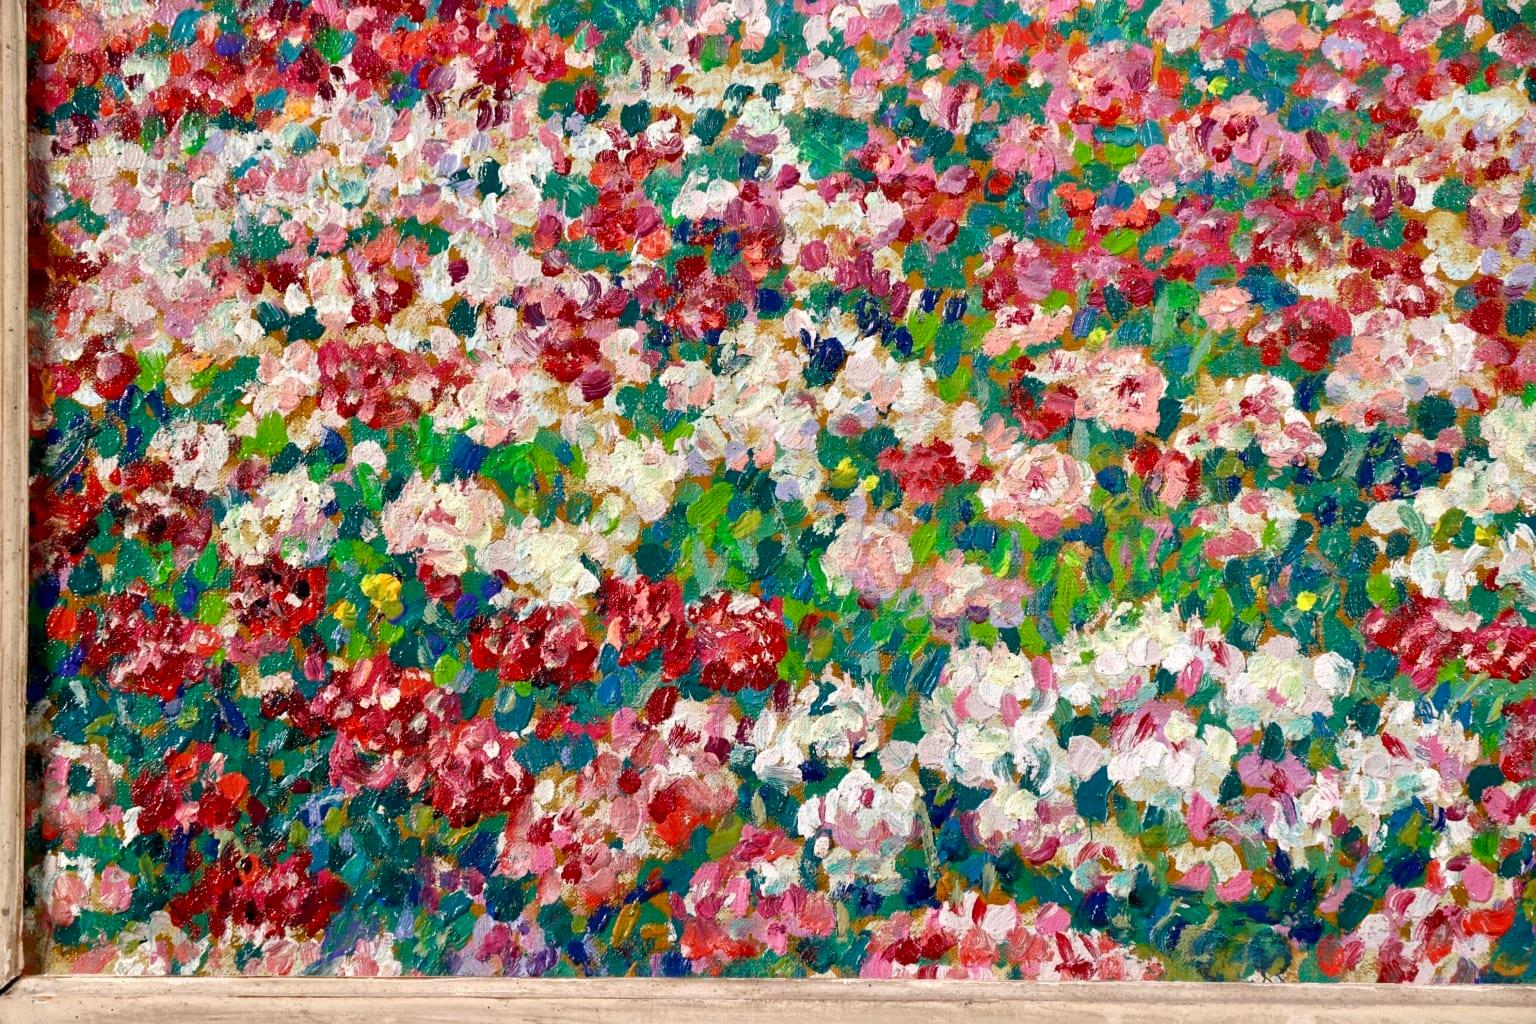 Field of Flowers - Post Impressionist Oil, Landscape Oil by J Martin-Ferrieres 3